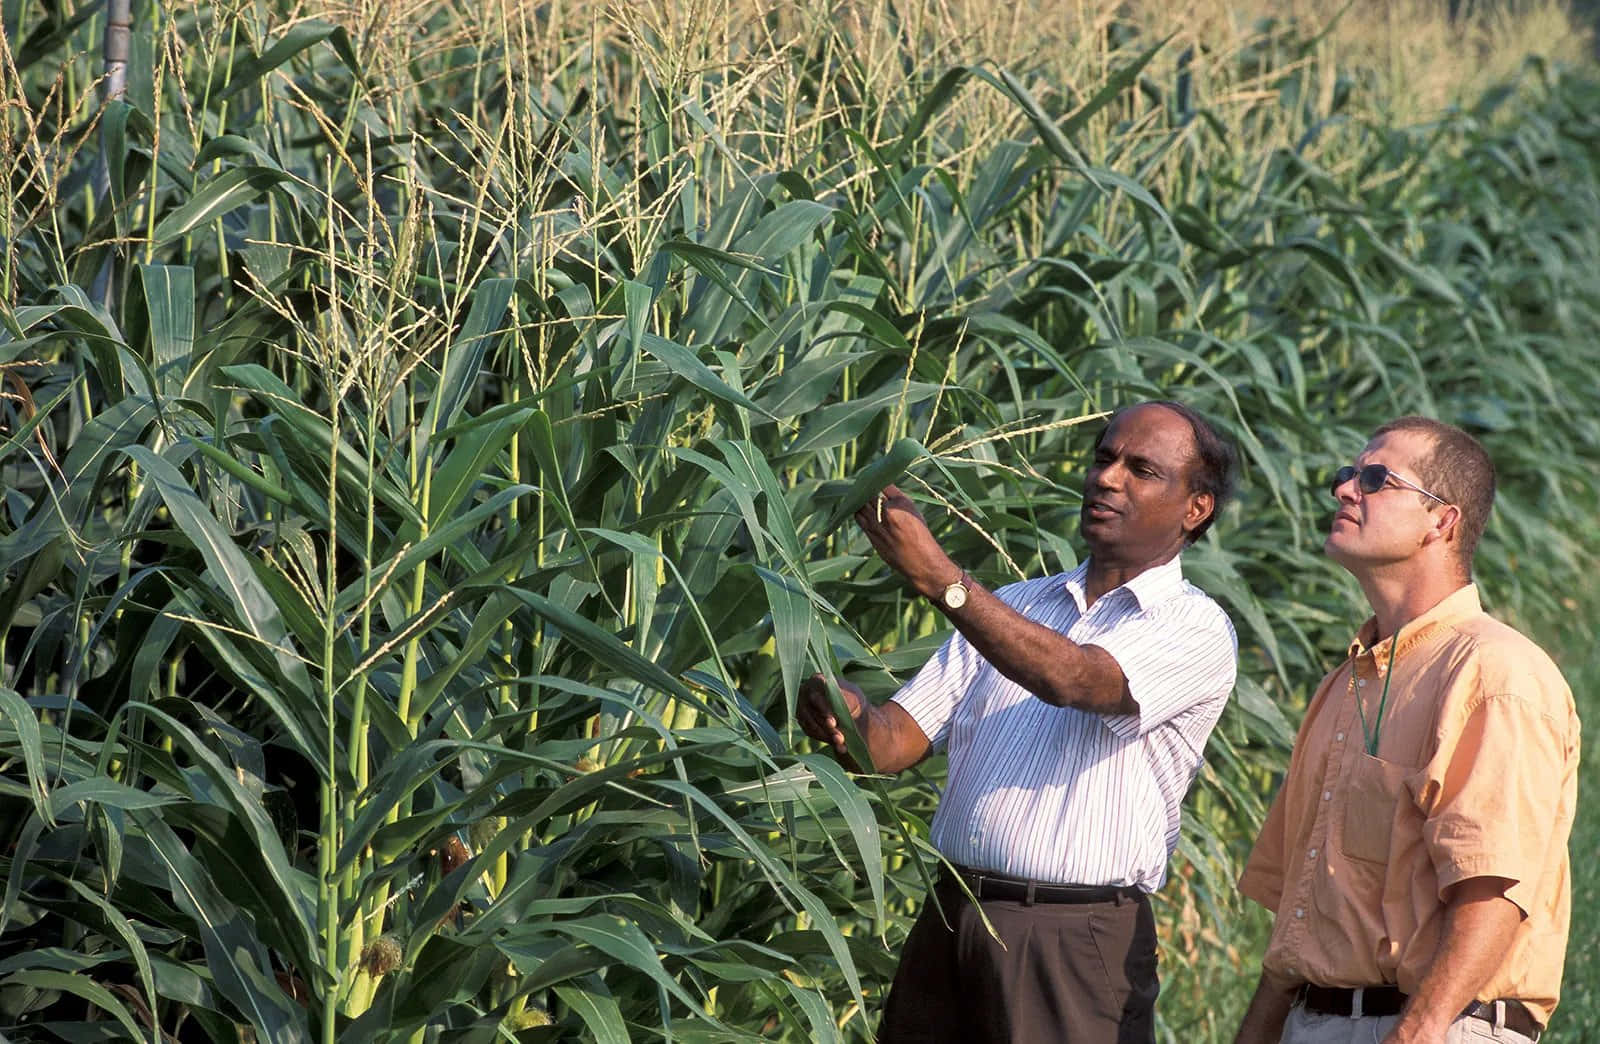 Two Men Standing In A Field Looking At Corn